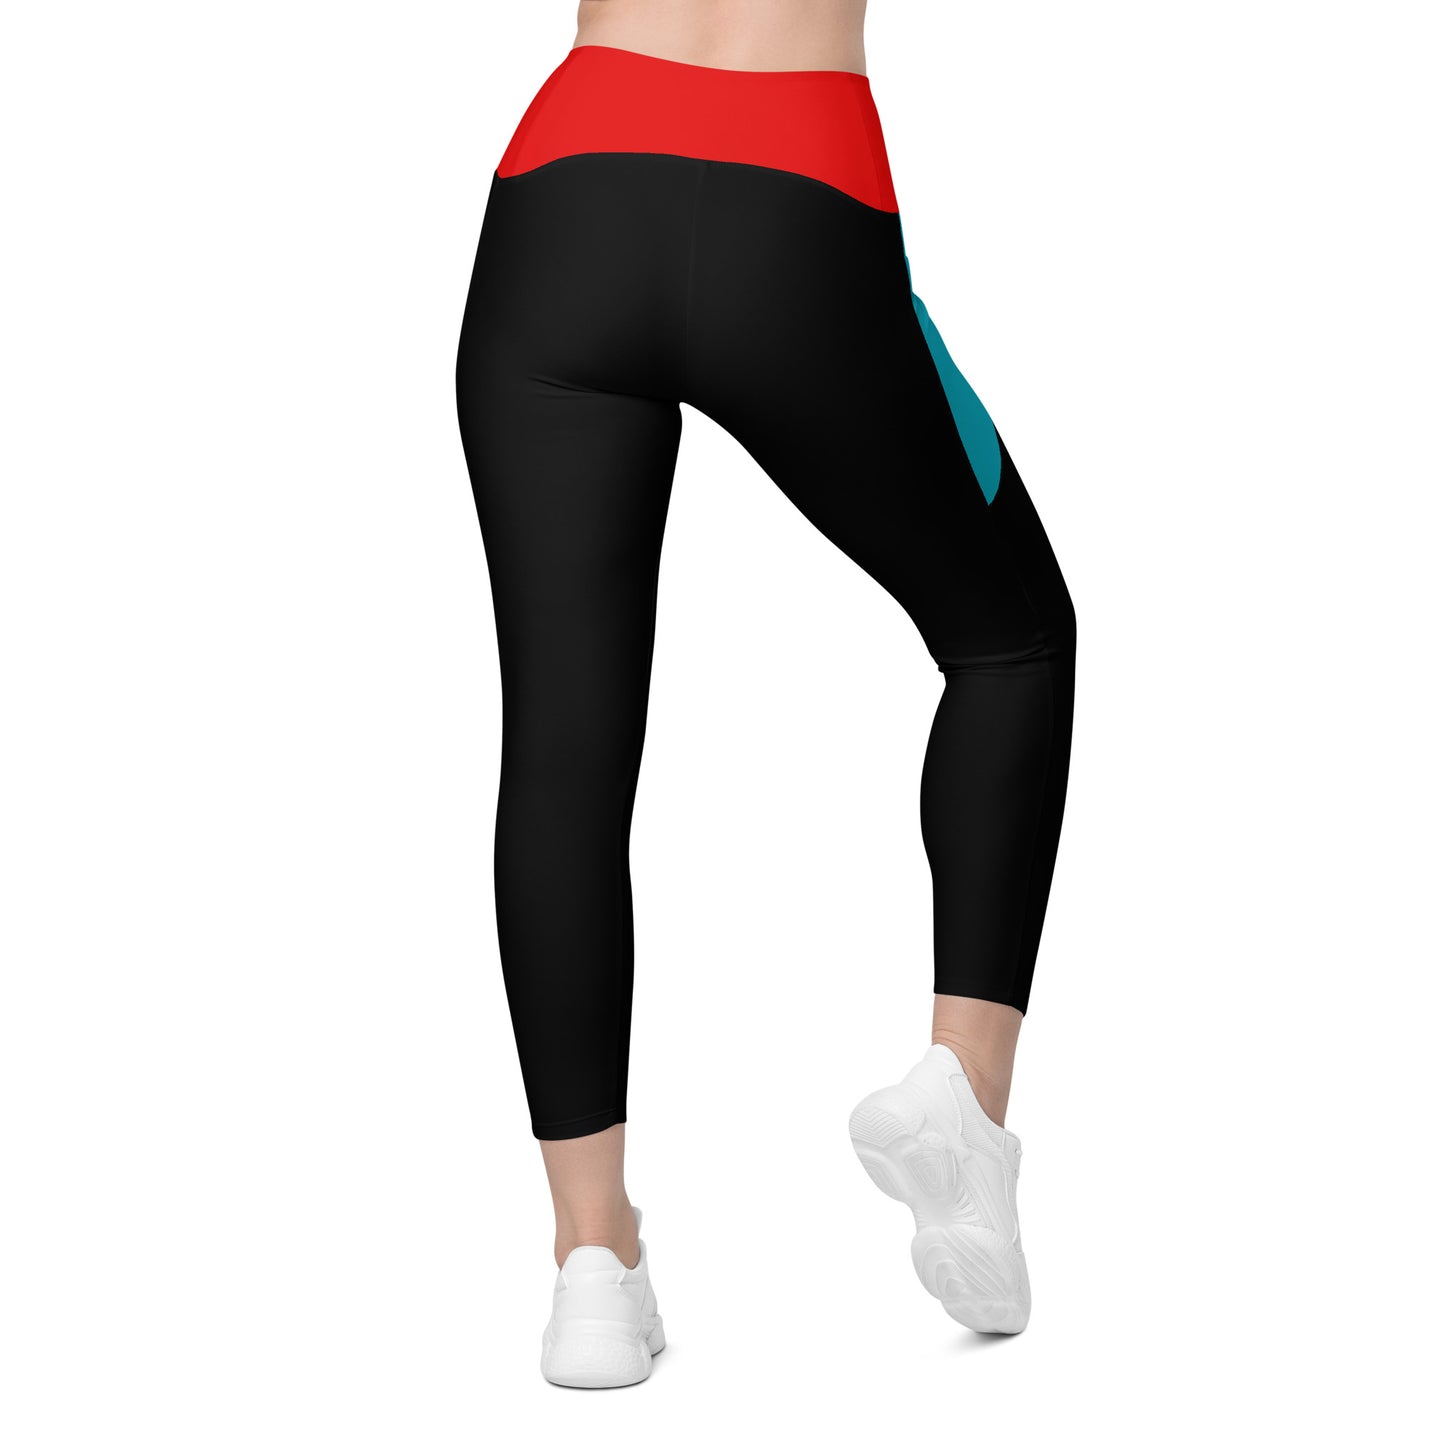 Warrior of Life Leggings with pockets